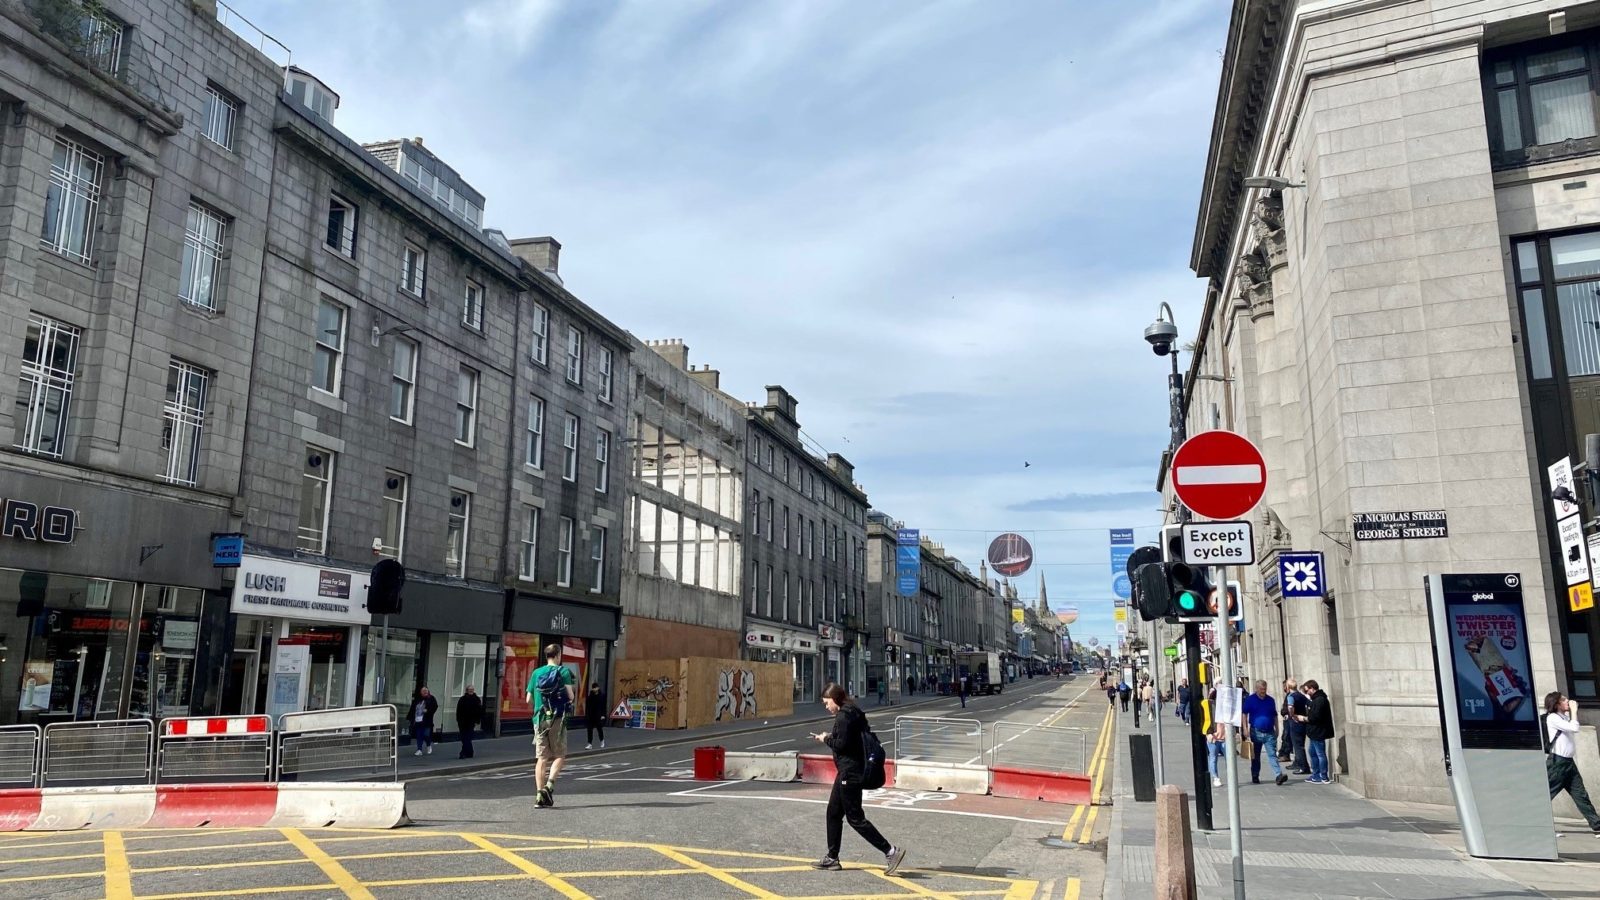 Central section of Union Street with new bus gate to reopen today